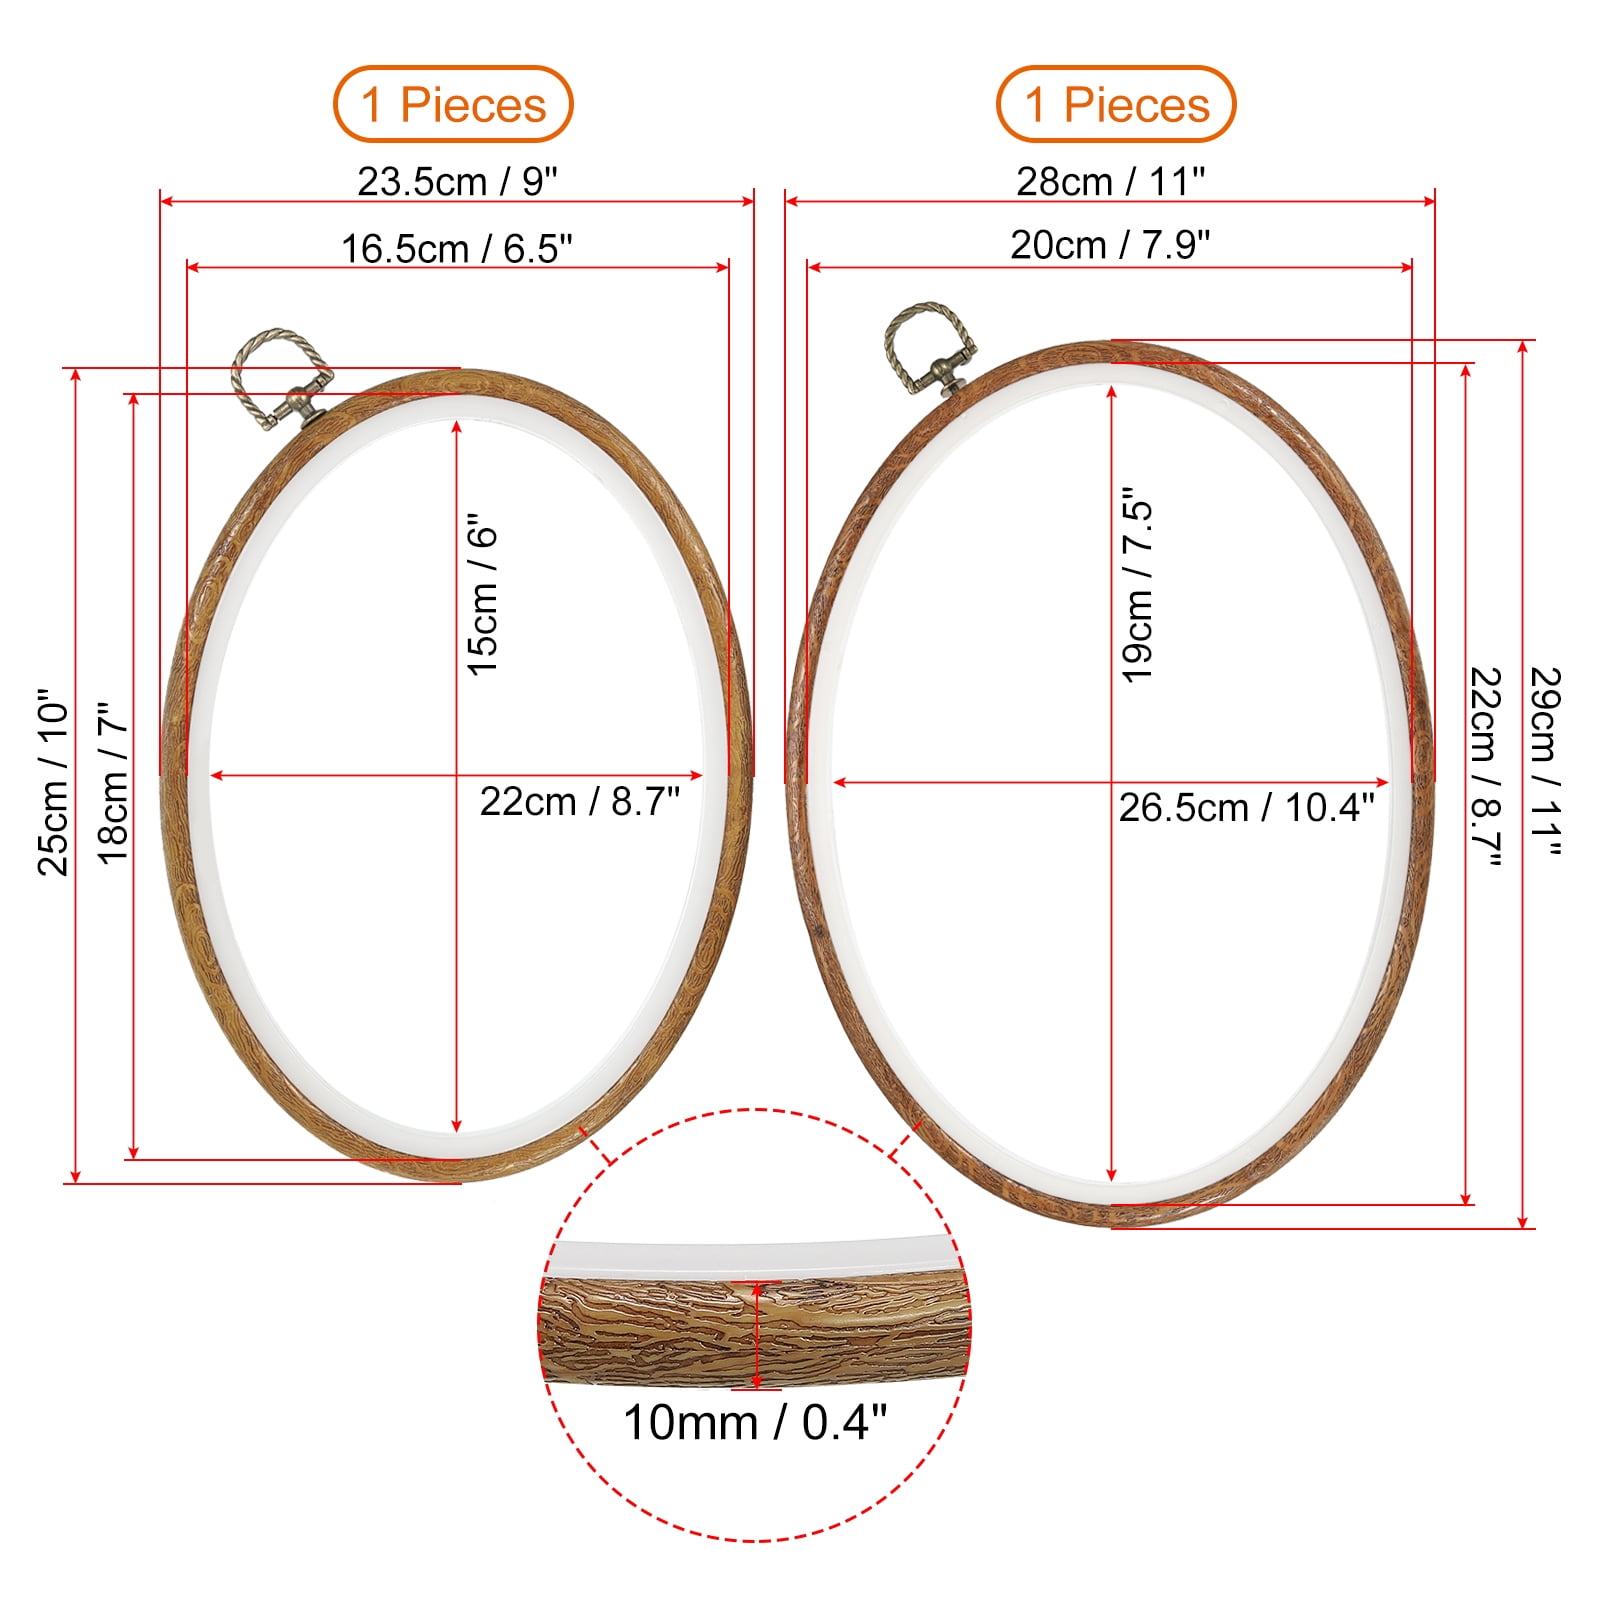 QLOUNI 5 Pcs Embroidery Hoops Set Cross Stitch Hoop Ring Imitated Wood  Display Frame-Circle and Oval Hand Embroidery Kits for